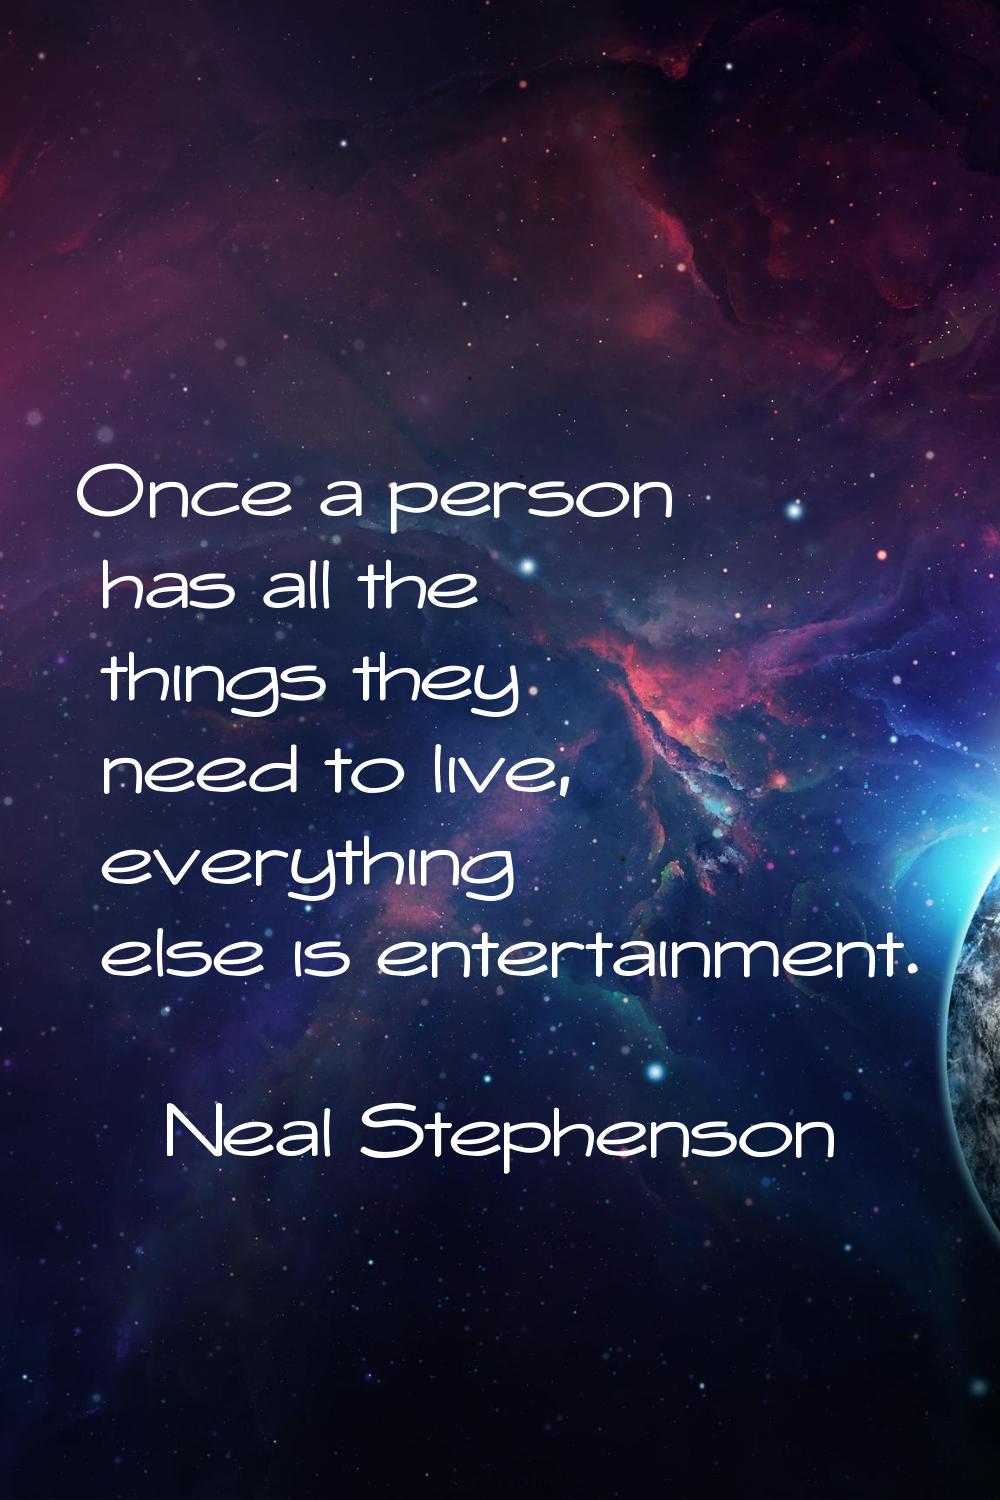 Once a person has all the things they need to live, everything else is entertainment.